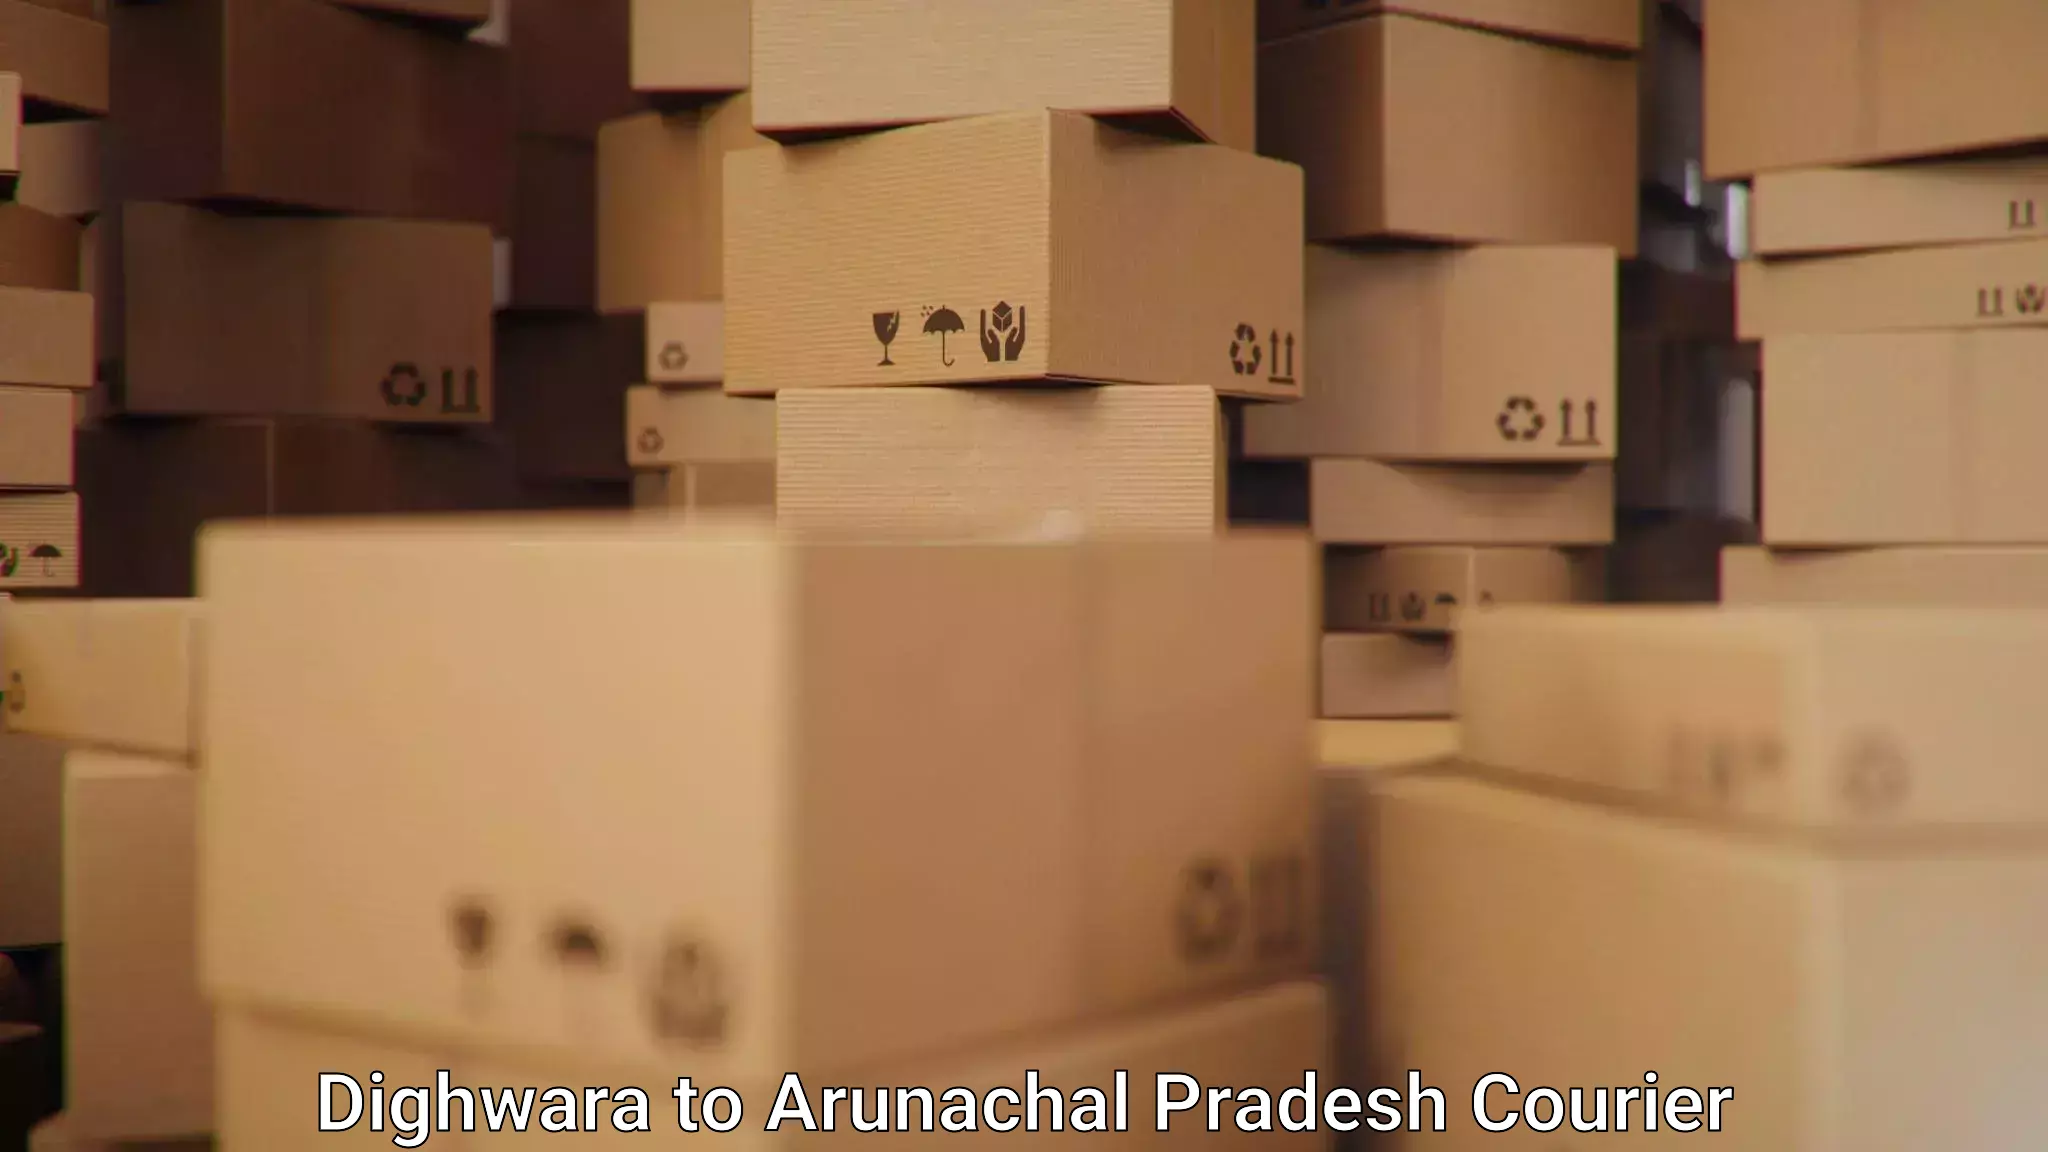 State-of-the-art courier technology Dighwara to Dirang